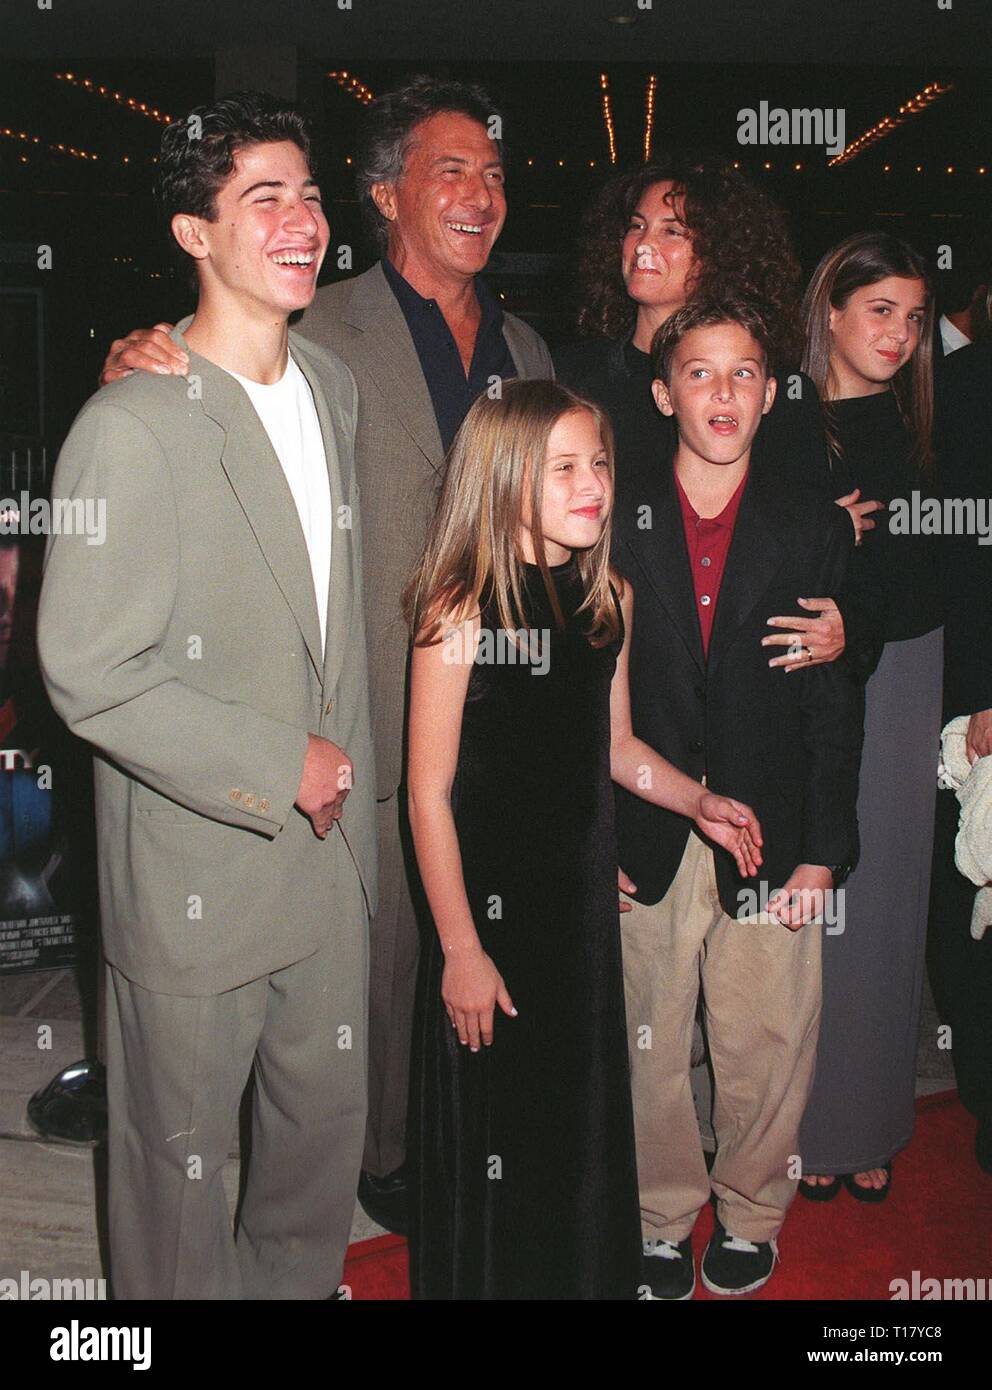 LOS ANGELES, CA. October 27, 1997:   Actor Dustin Hoffman & wife & children at the premiere in Los Angeles of 'Mad City' in which he stars with John Travolta. Stock Photo